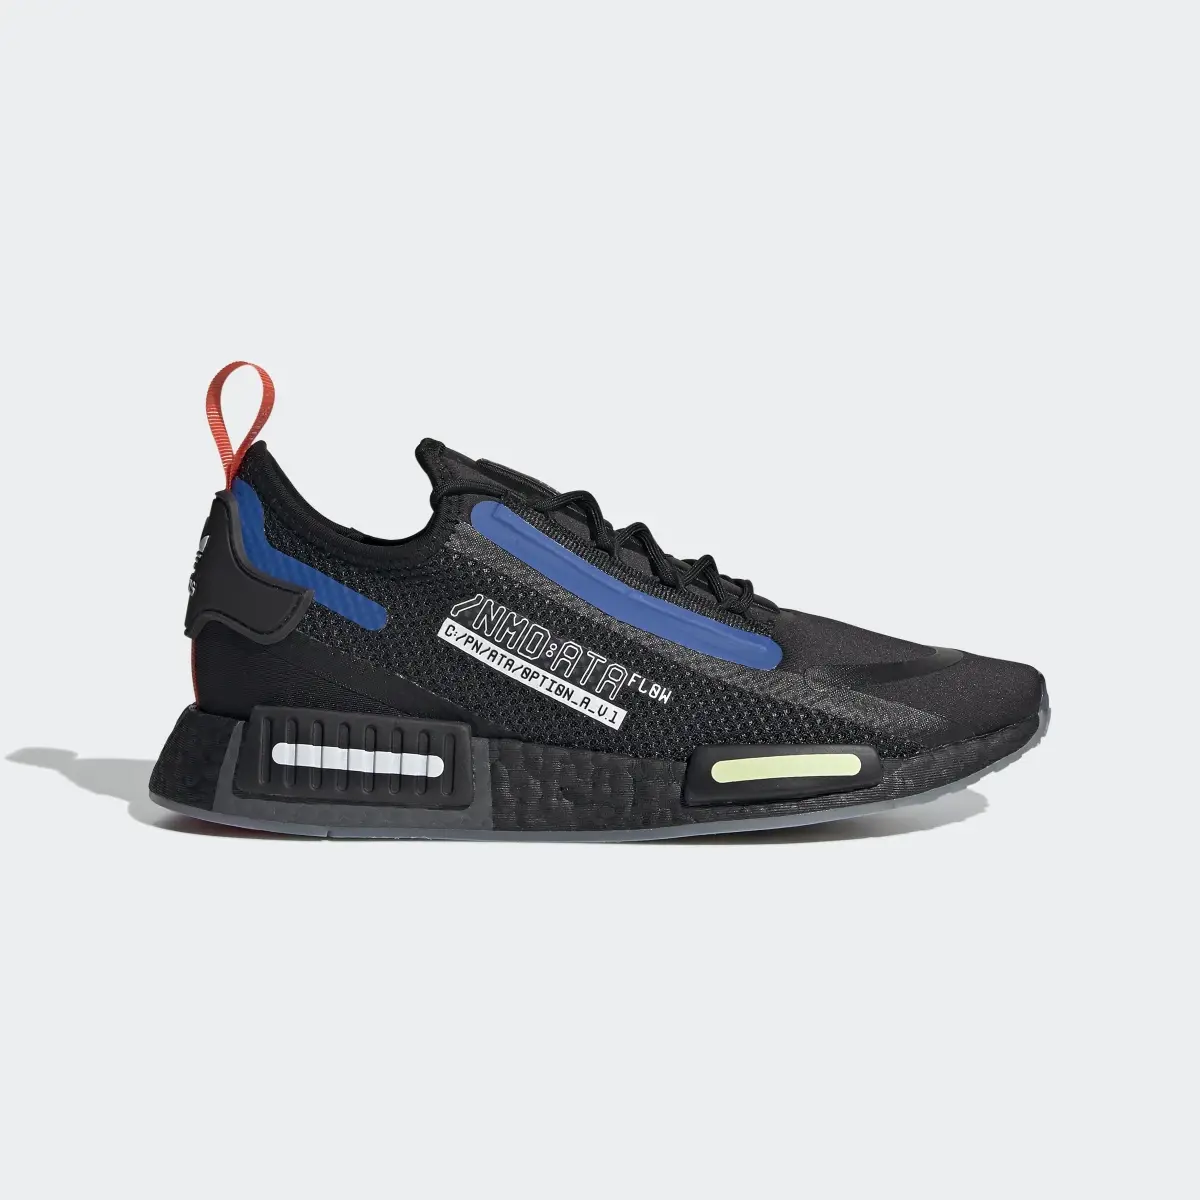 Adidas NMD_R1 SPECTOO SHOES. 2